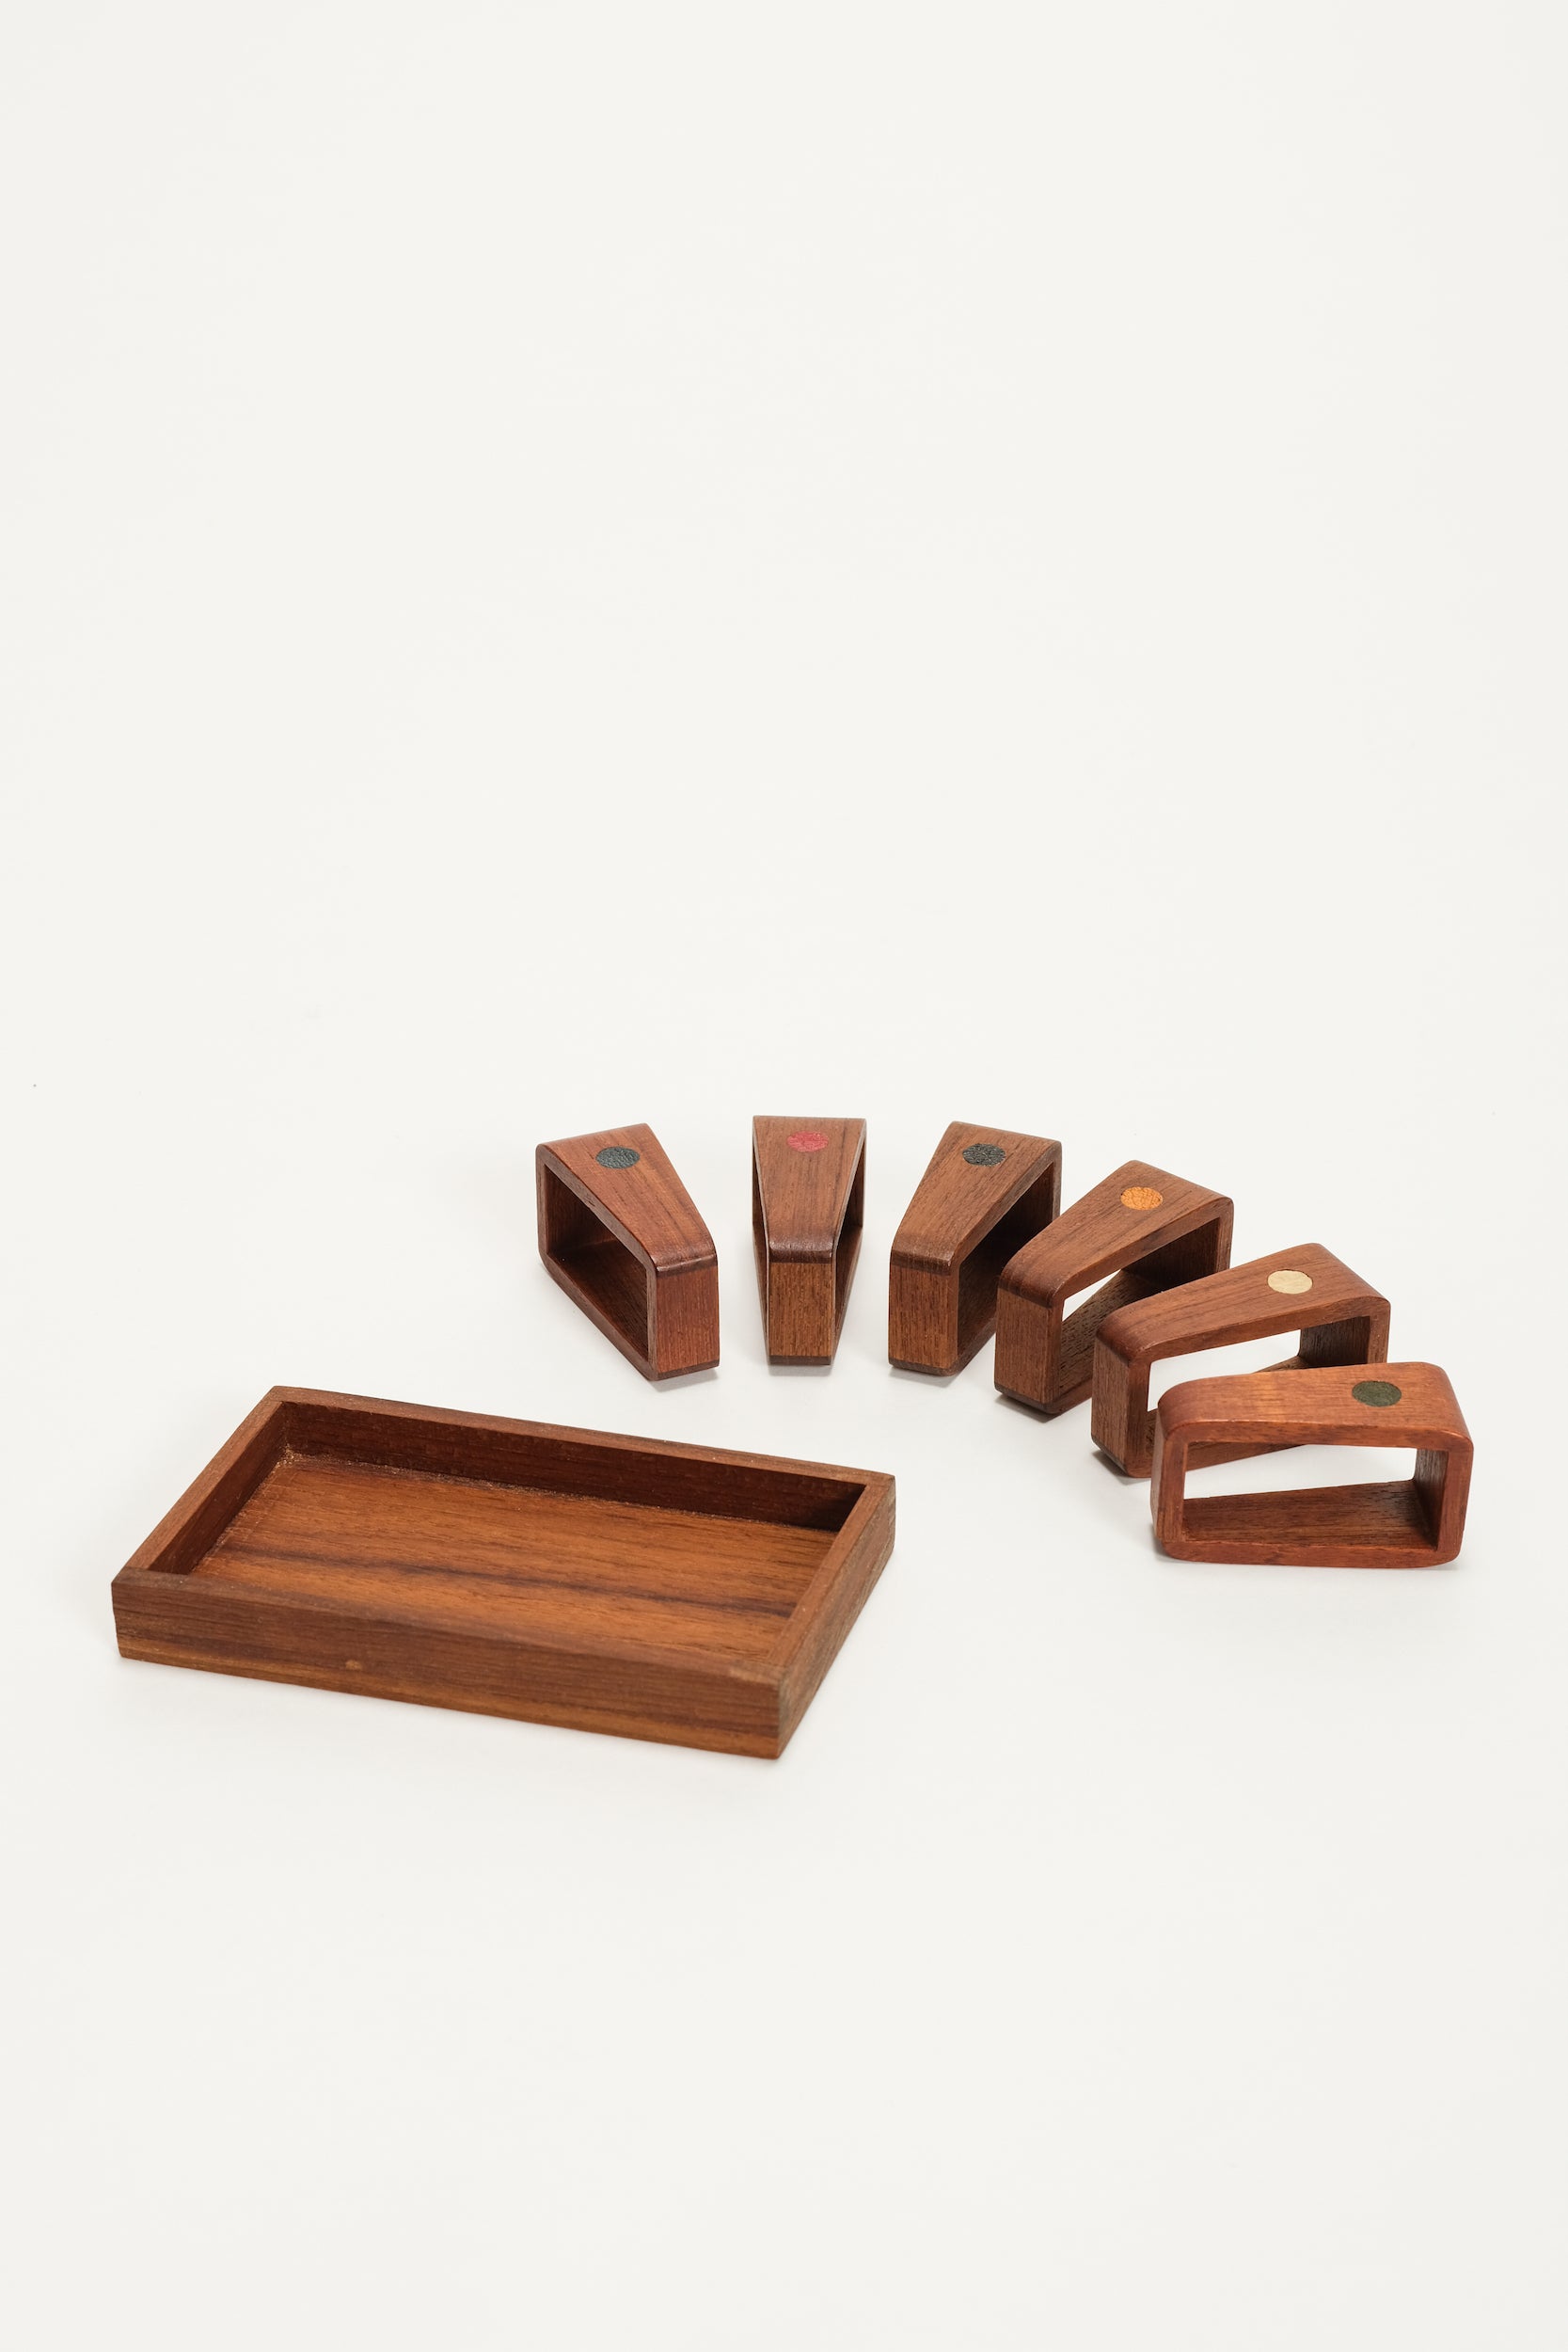 Set of 6 napkin rings, rosewood and leather, 1960s